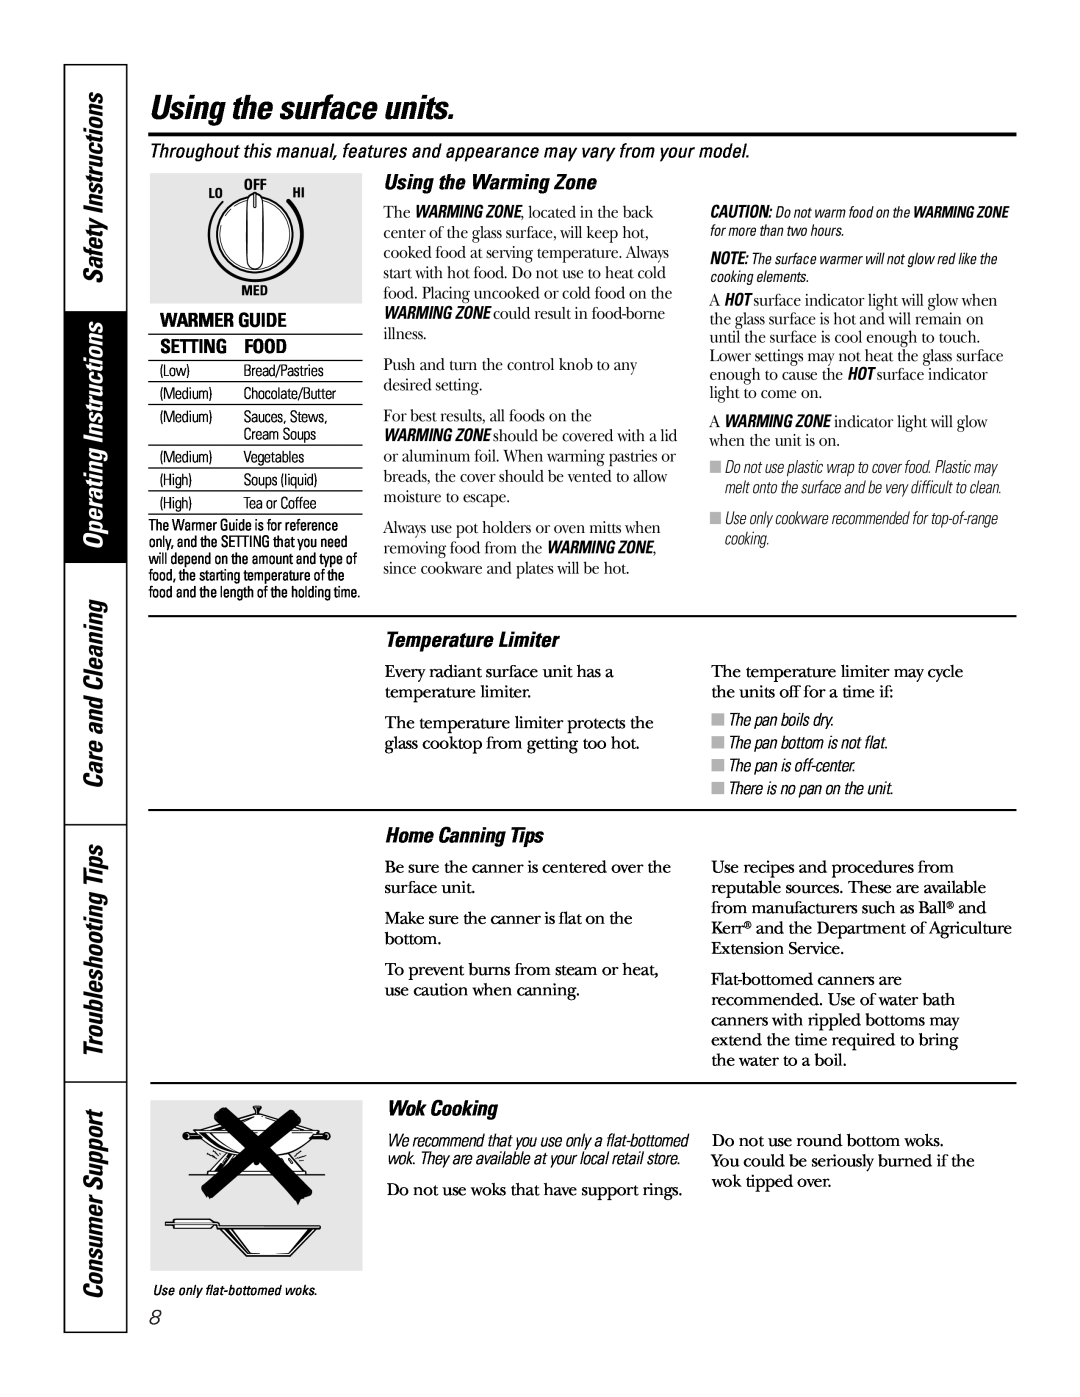 GE JBP89 Operating Instructions Safety, Troubleshooting Tips, Consumer Support, Care and Cleaning, Temperature Limiter 